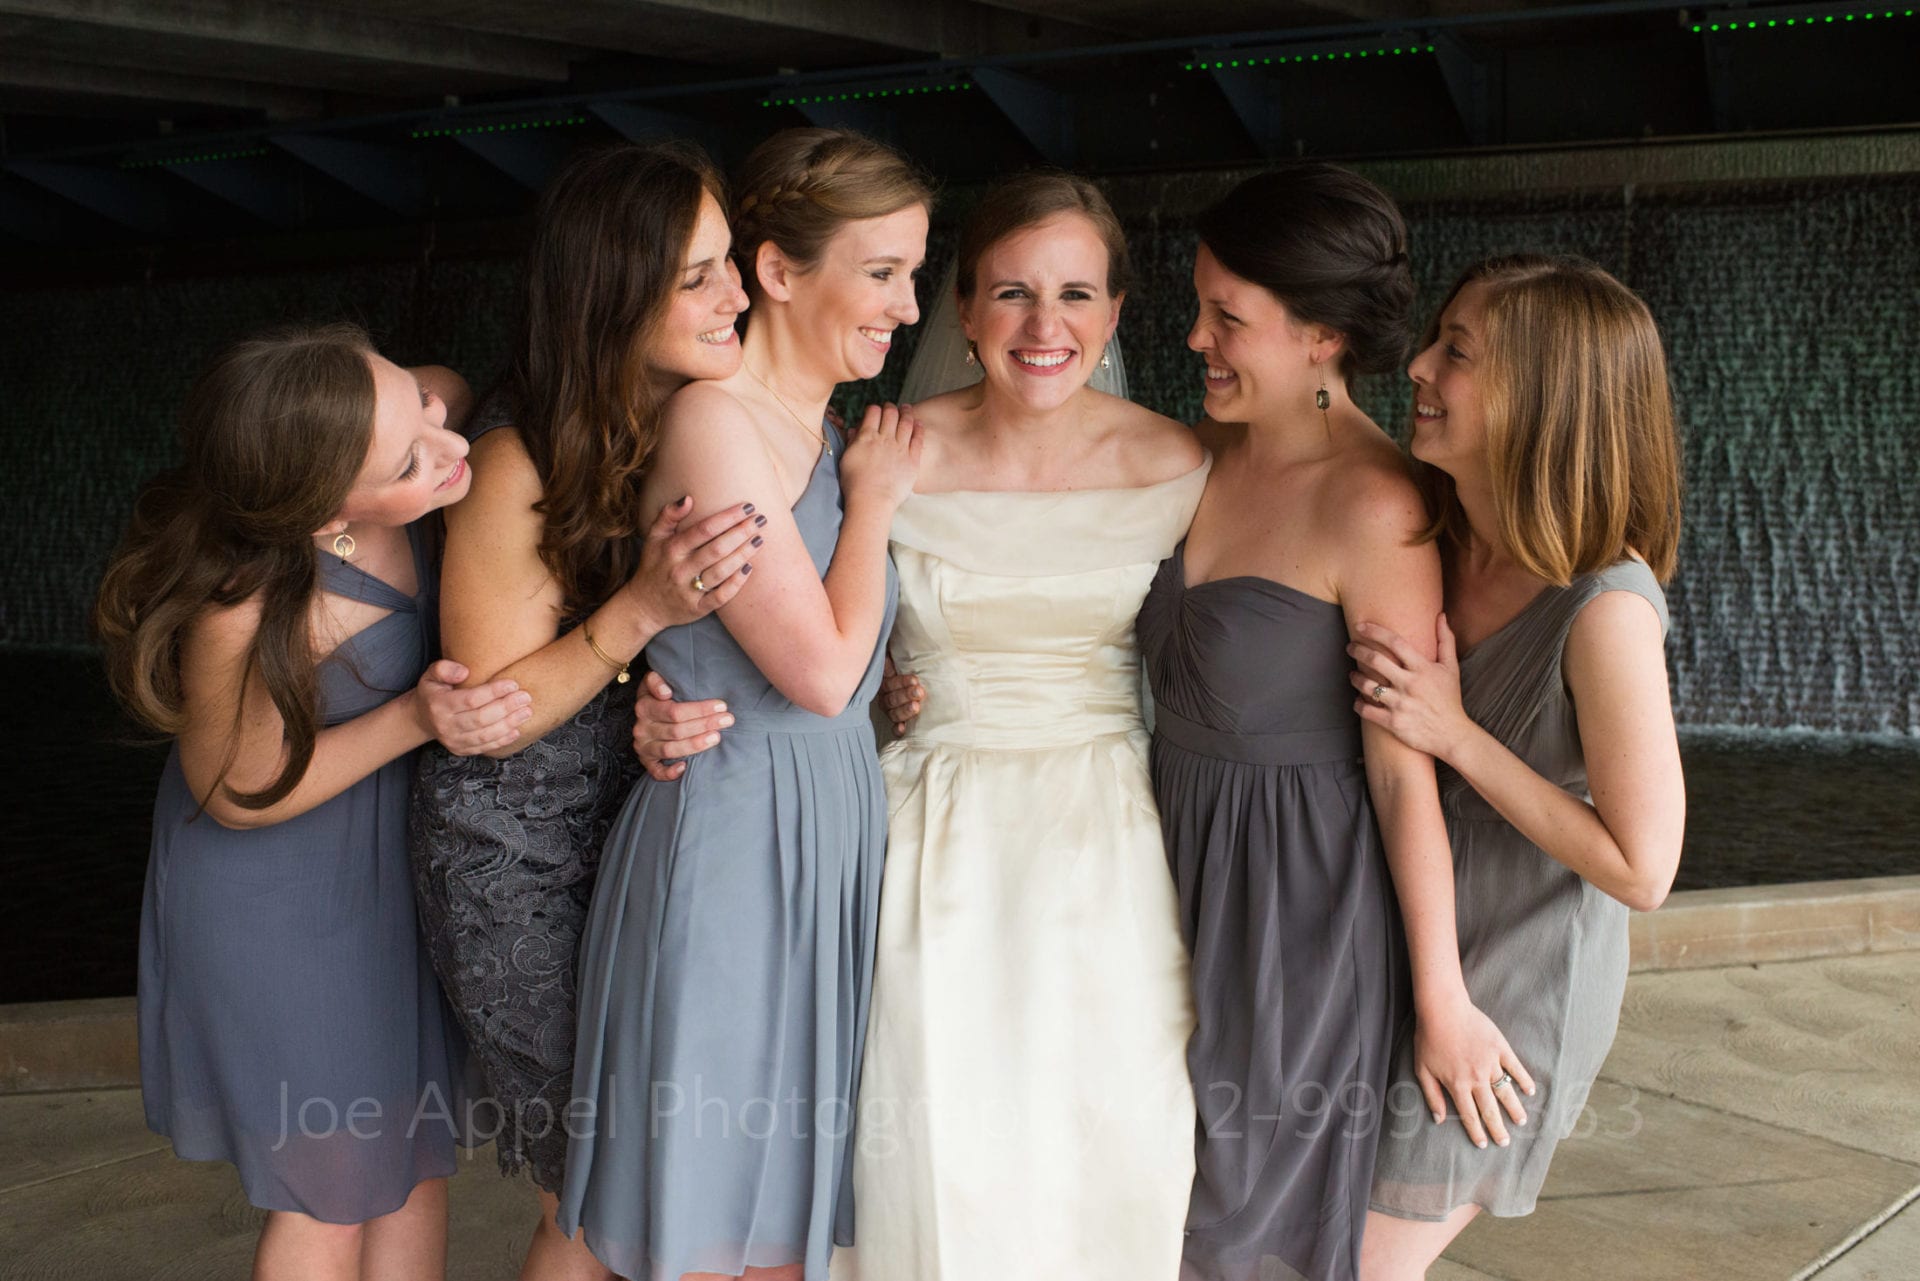 A bride in a white silk dress smiles while hugging her 5 bridesmaids who are dressed in different styles of gray dresses.